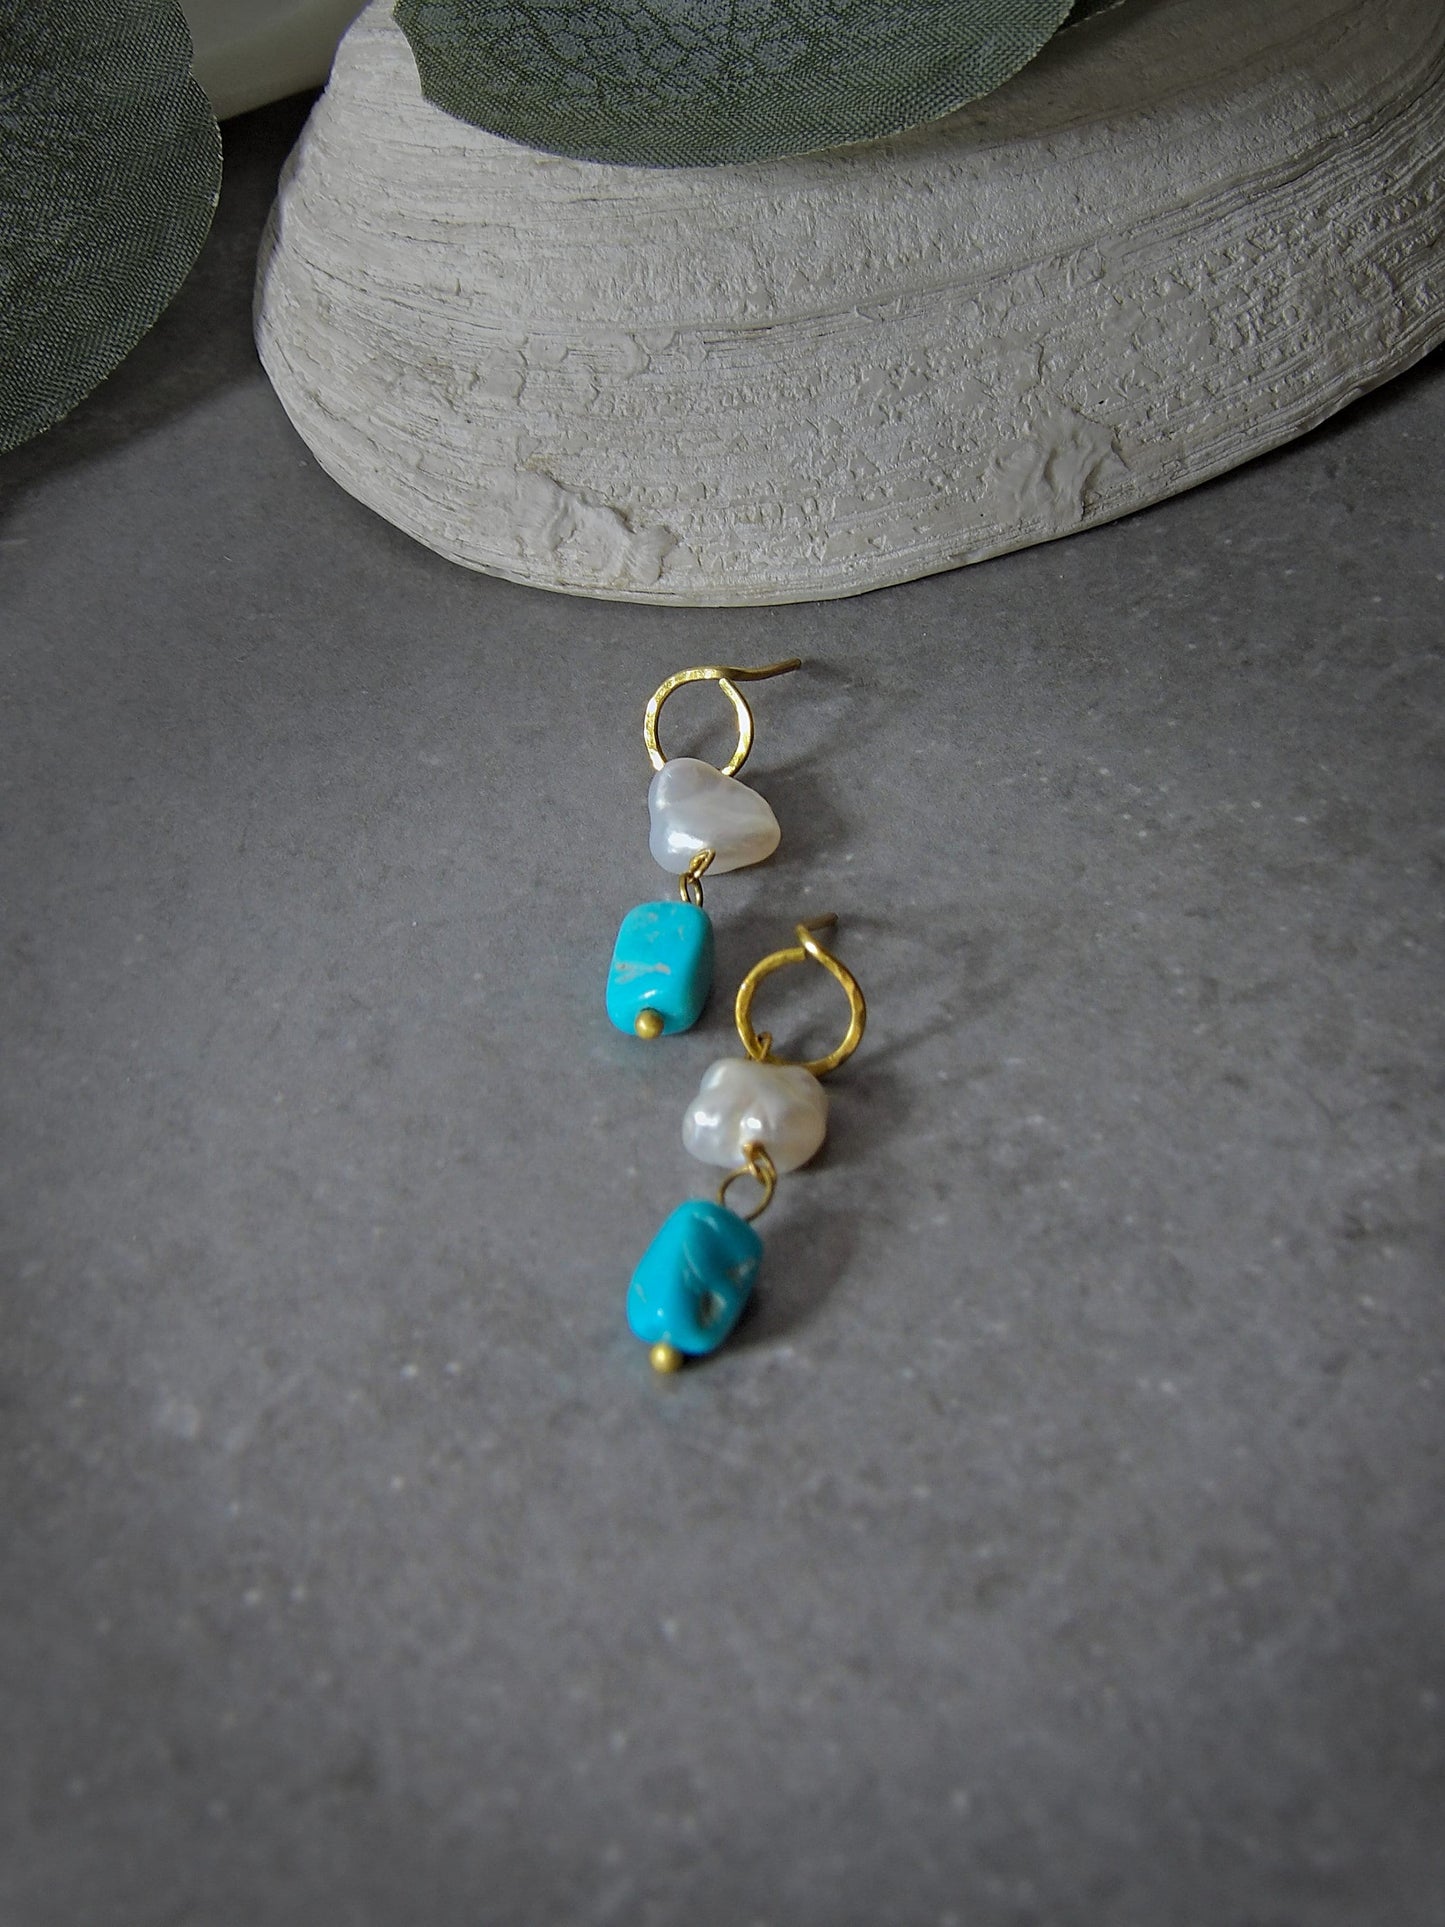 Irregular pearl earrings. Baroque pearl earrings. Arizona Turquoise Earrings. Turquoise Stud Earrings. Eco friendly authentic turquoise jewelry. Bohemian jewelry. Boho earrings. Open circle stud earrings.